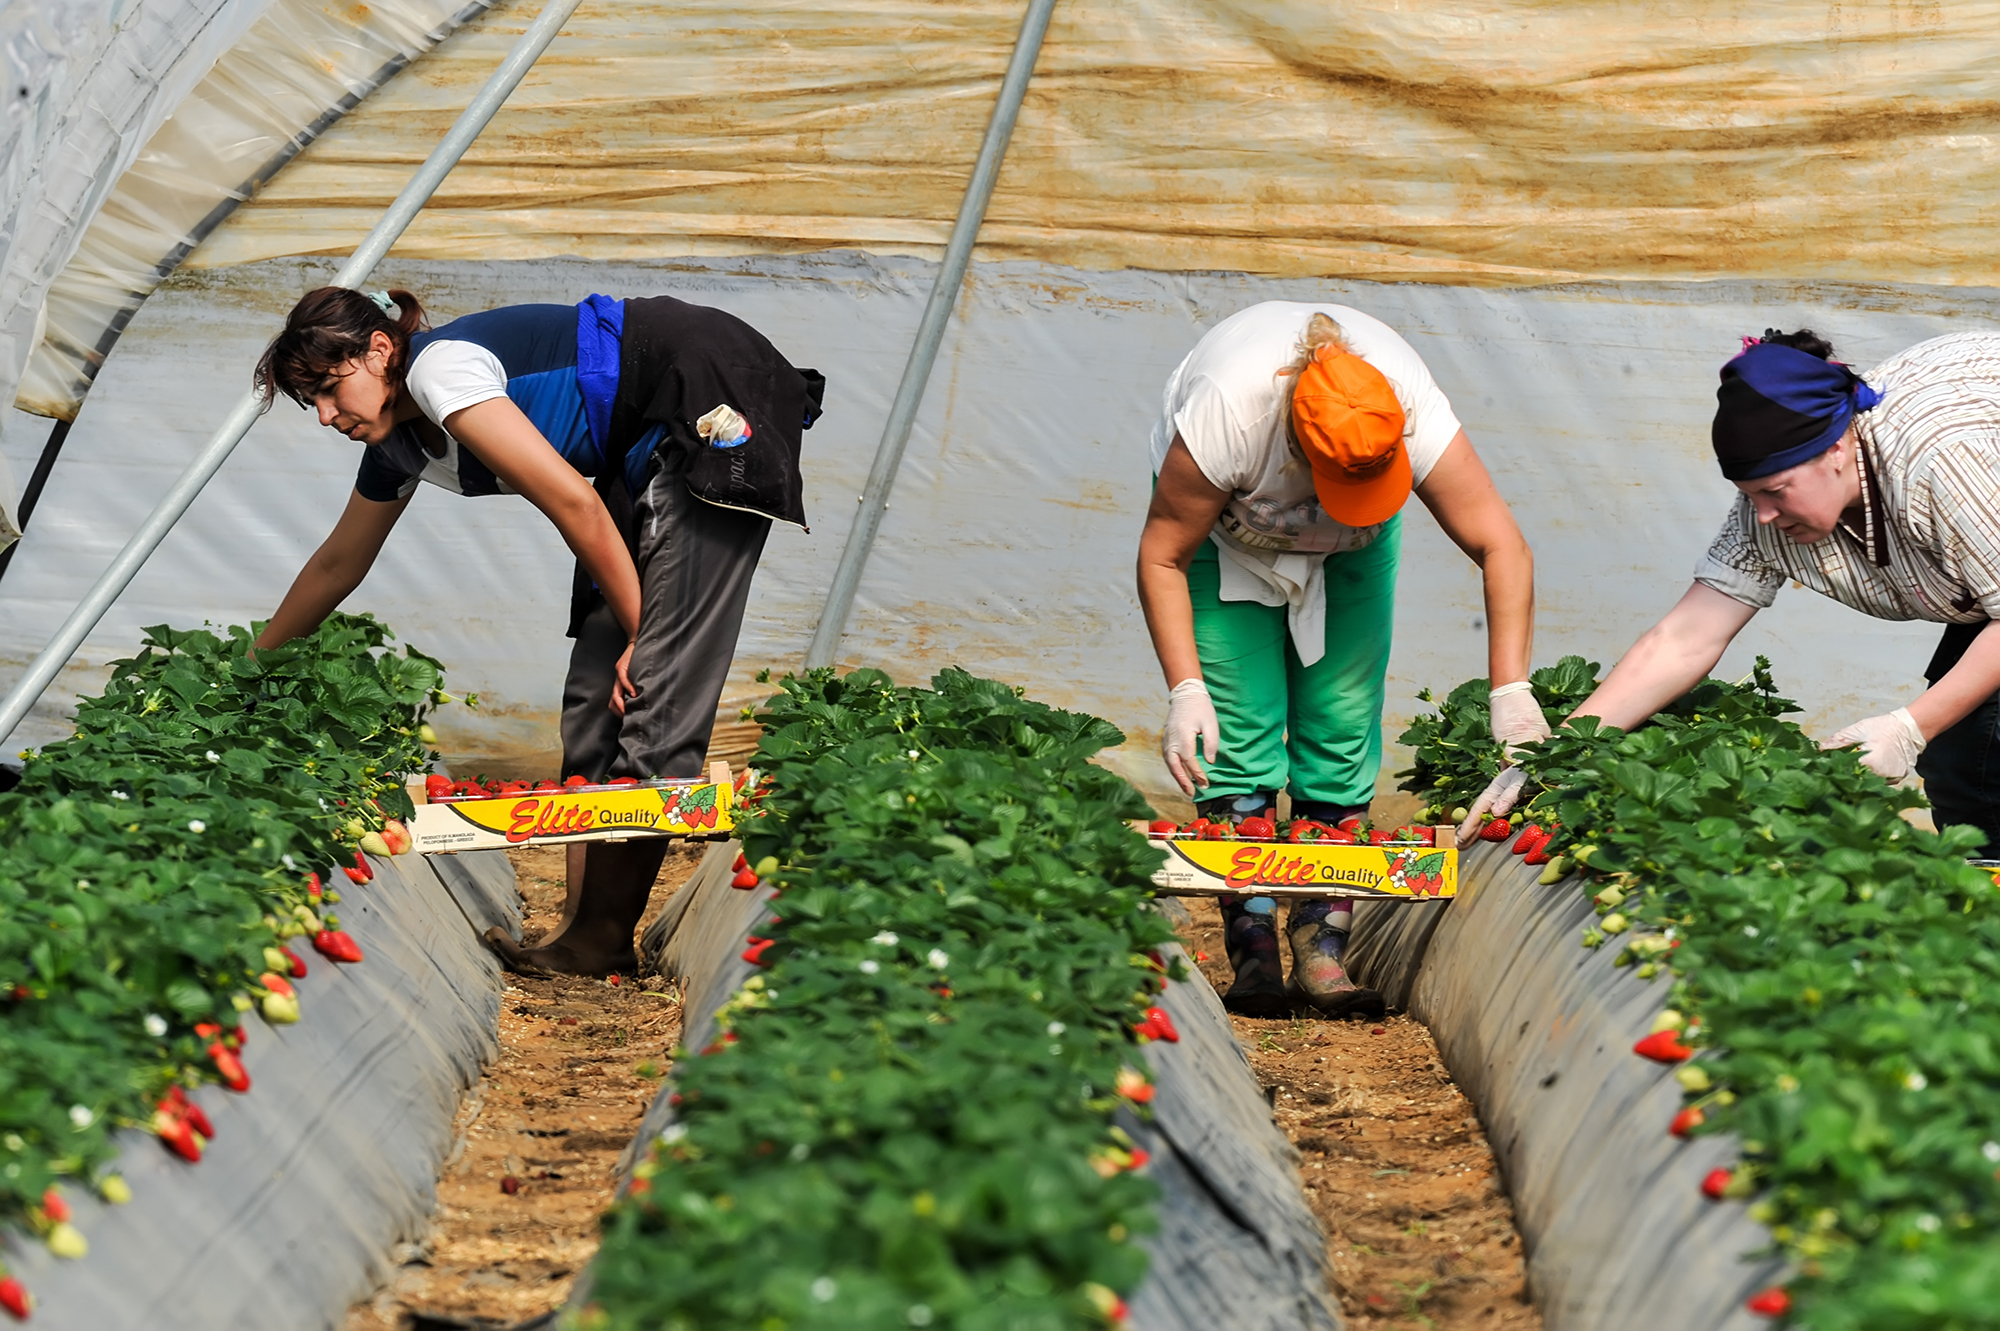 gives green light for seasonal workers